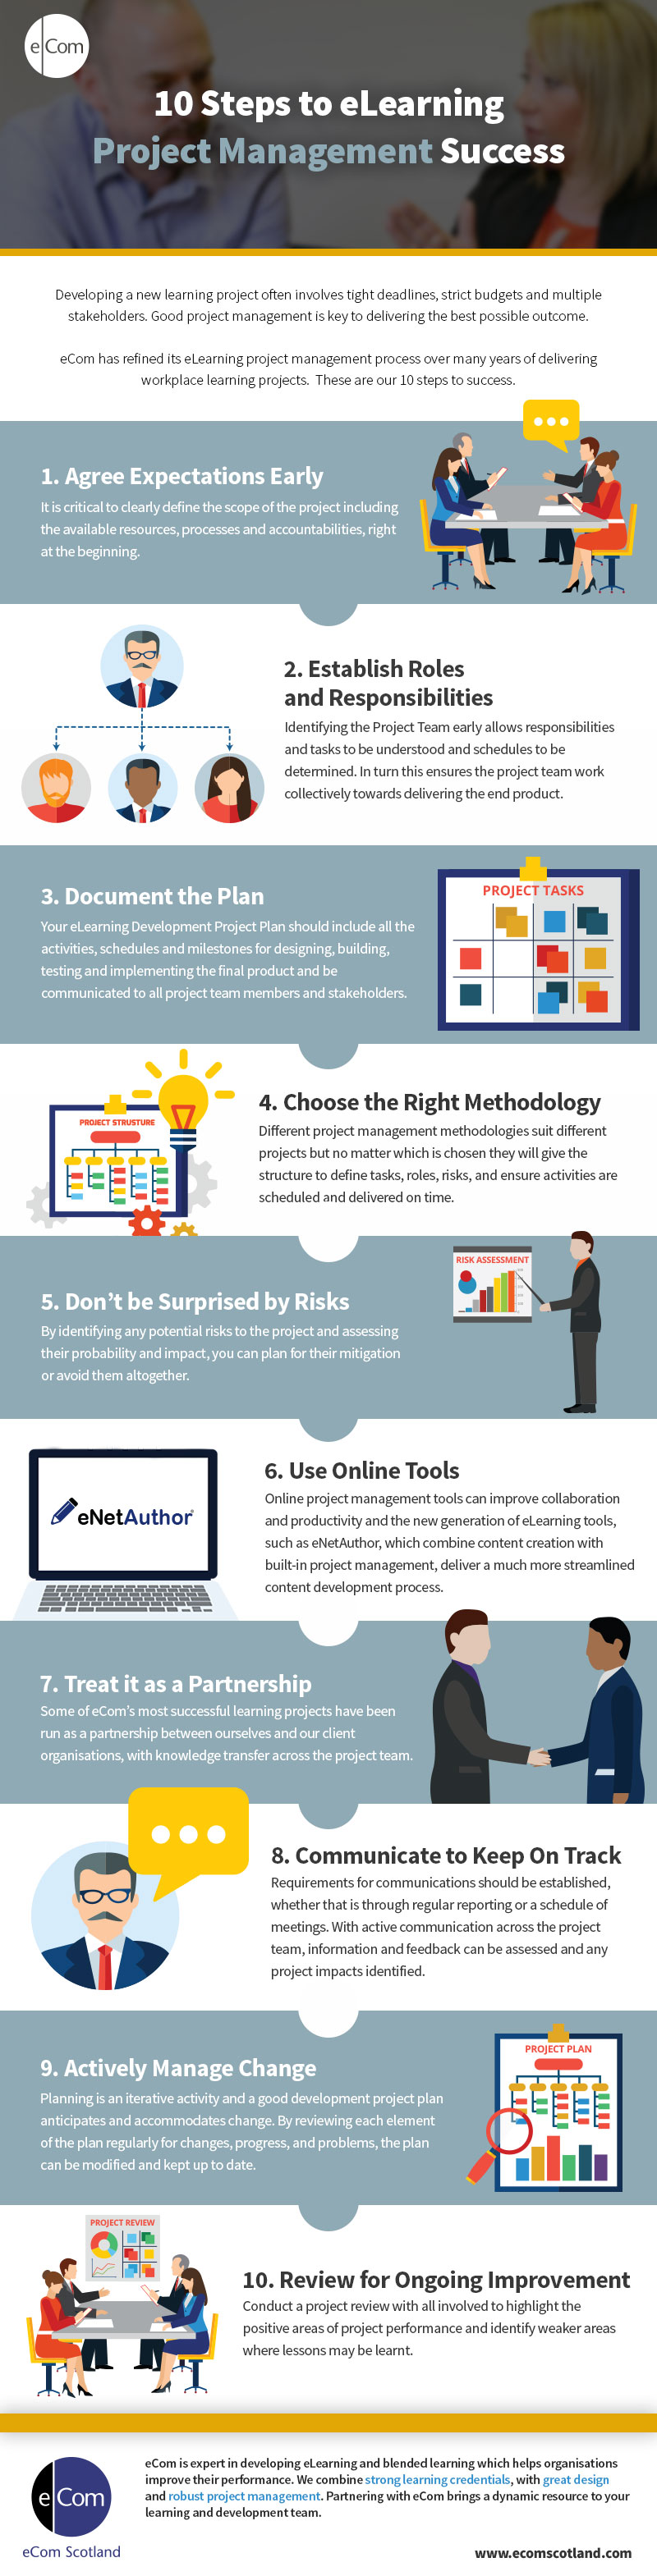 Infographic: 10 steps to eLearning project management success